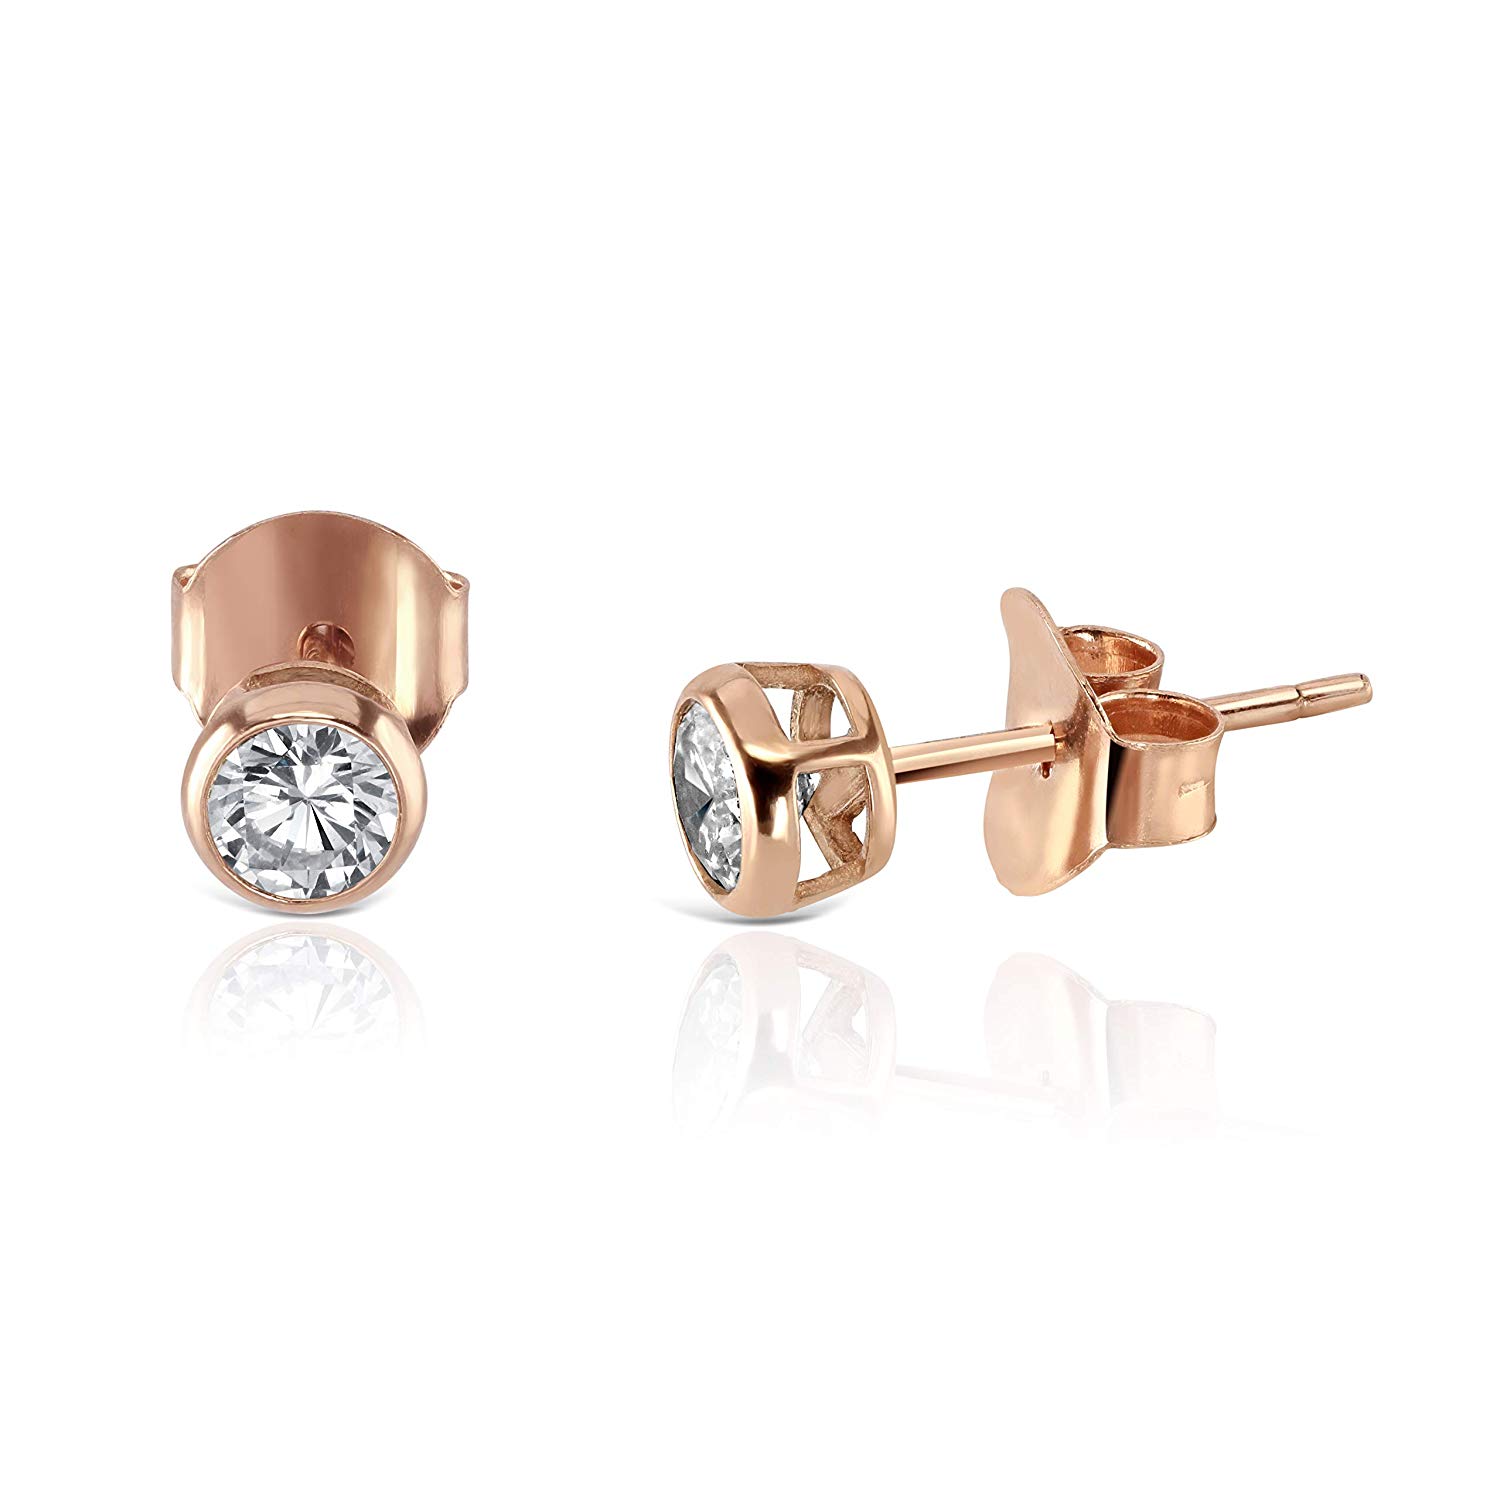 Cubic Zirconia 4mm Gem, Martini Set in Rose Gold Plated Sterling Silver ...